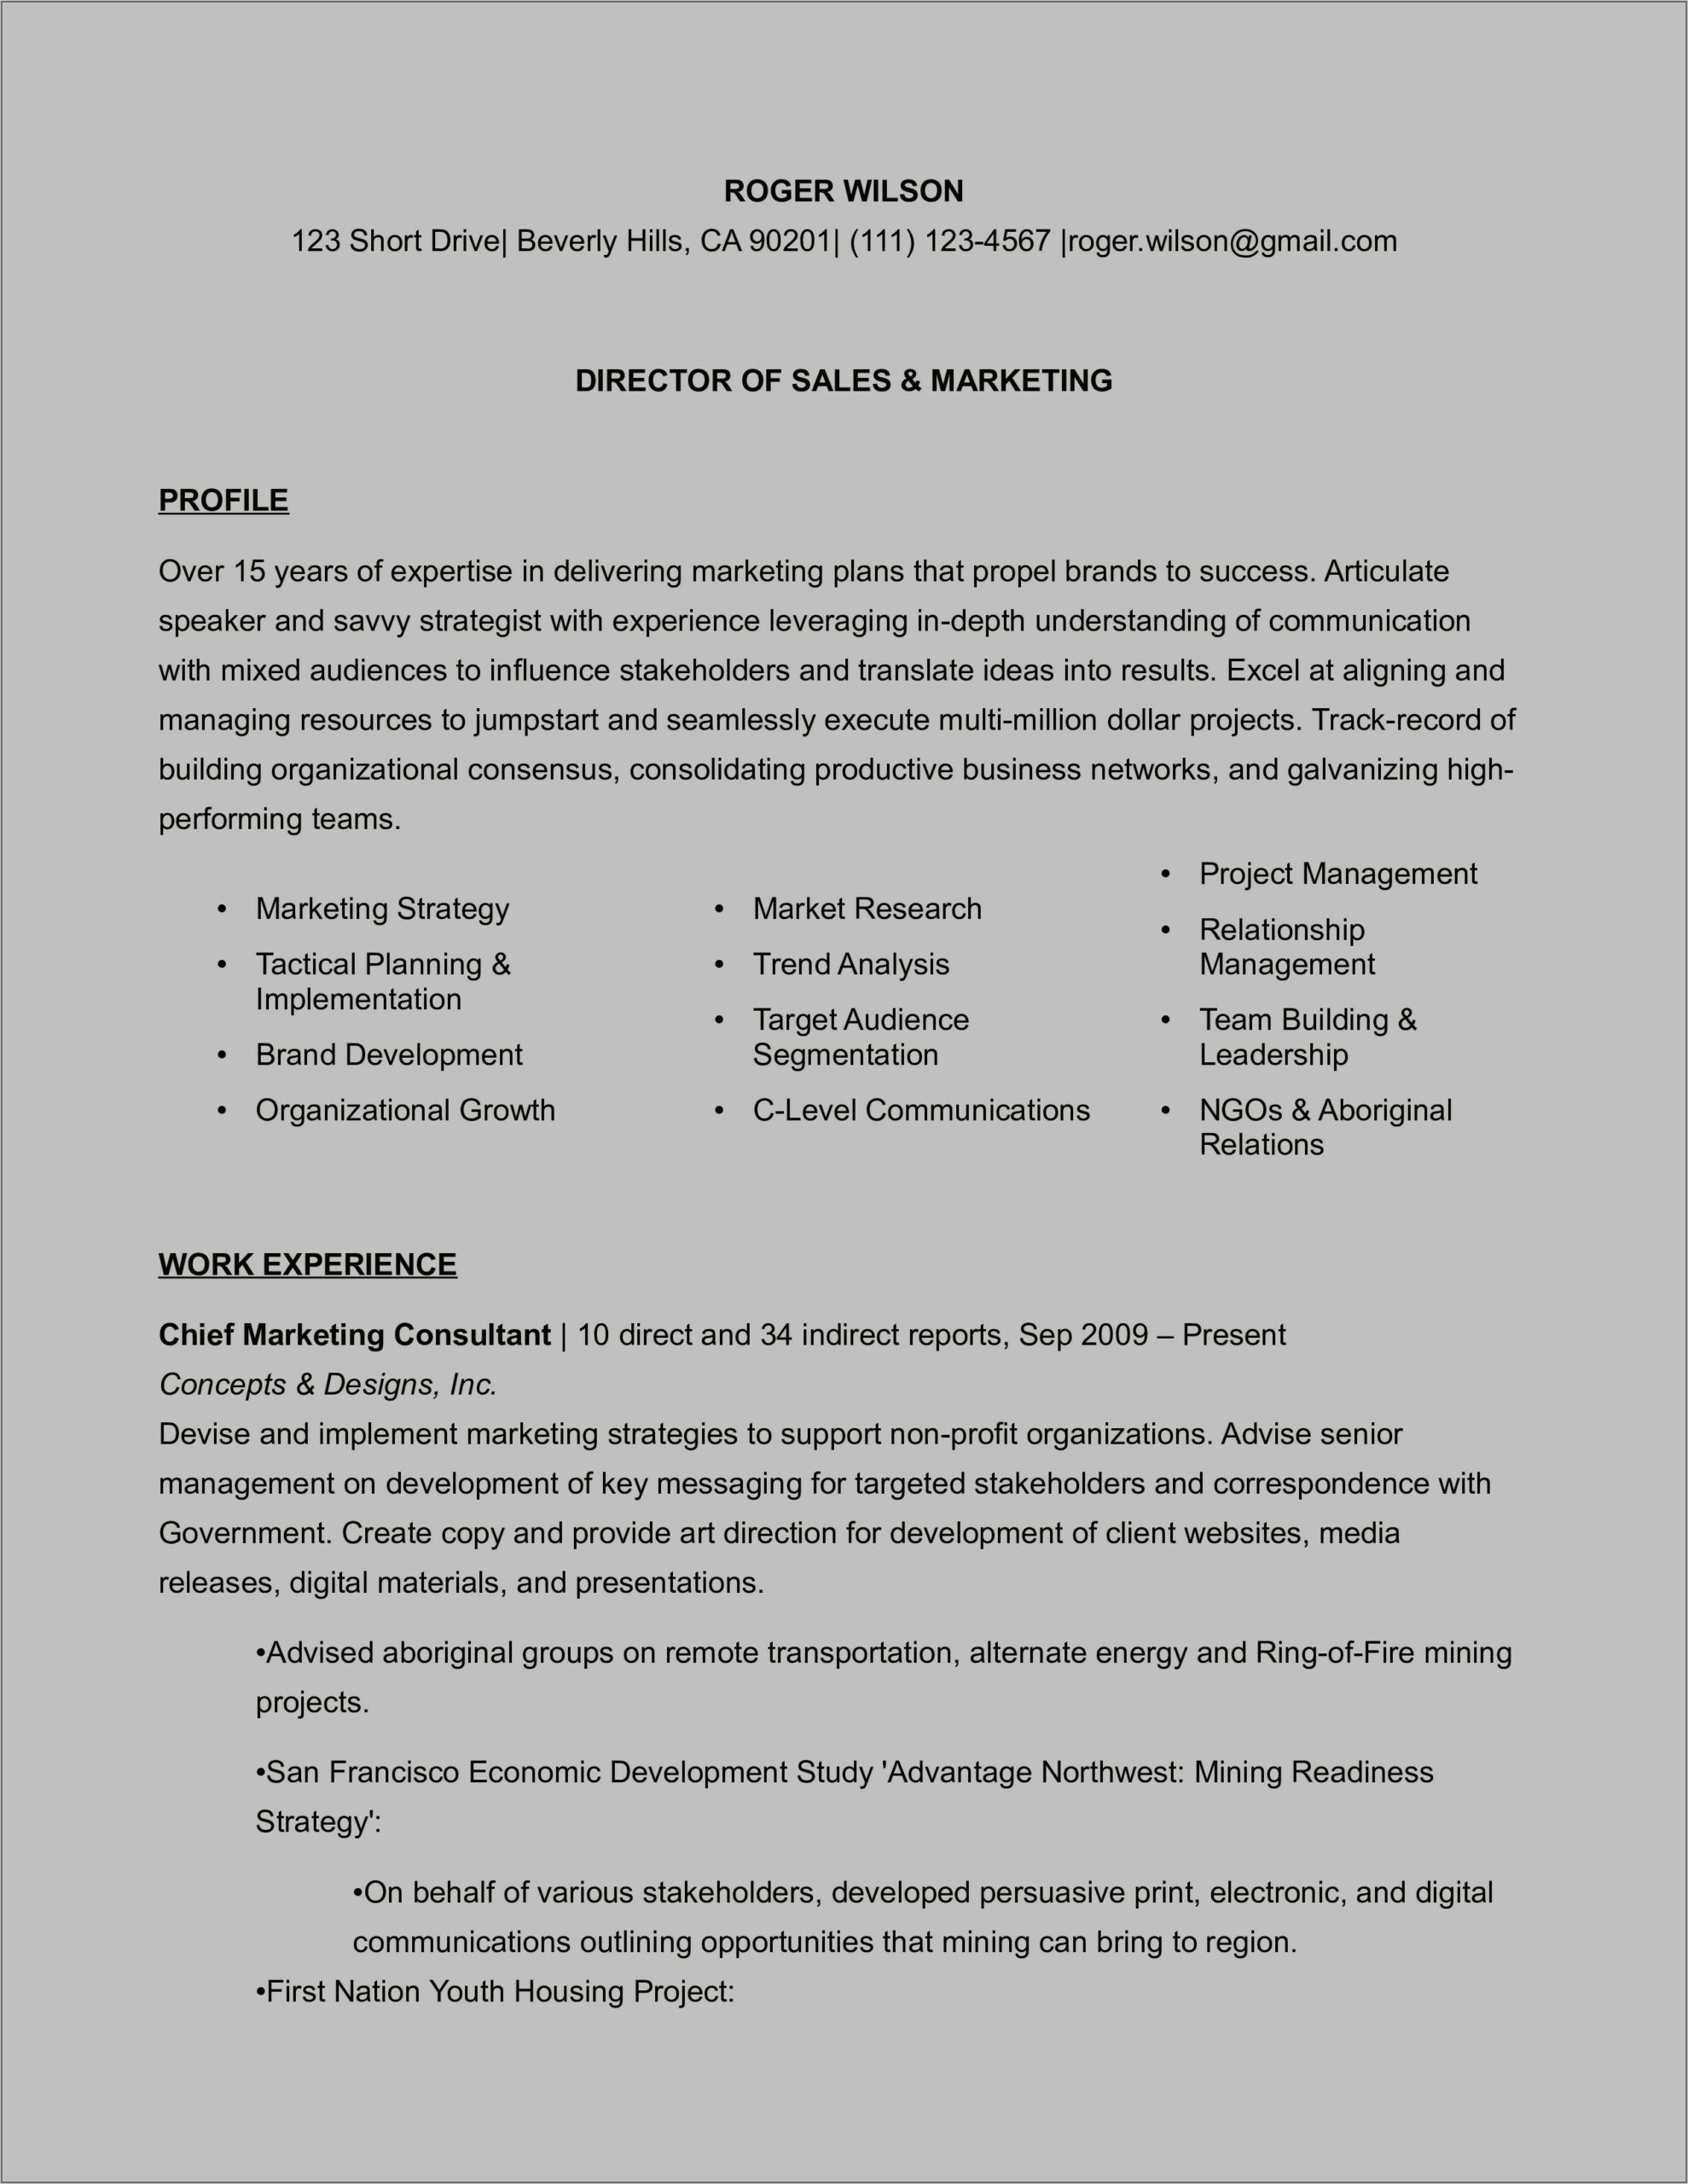 Managed And Developed Marketing Material Resume